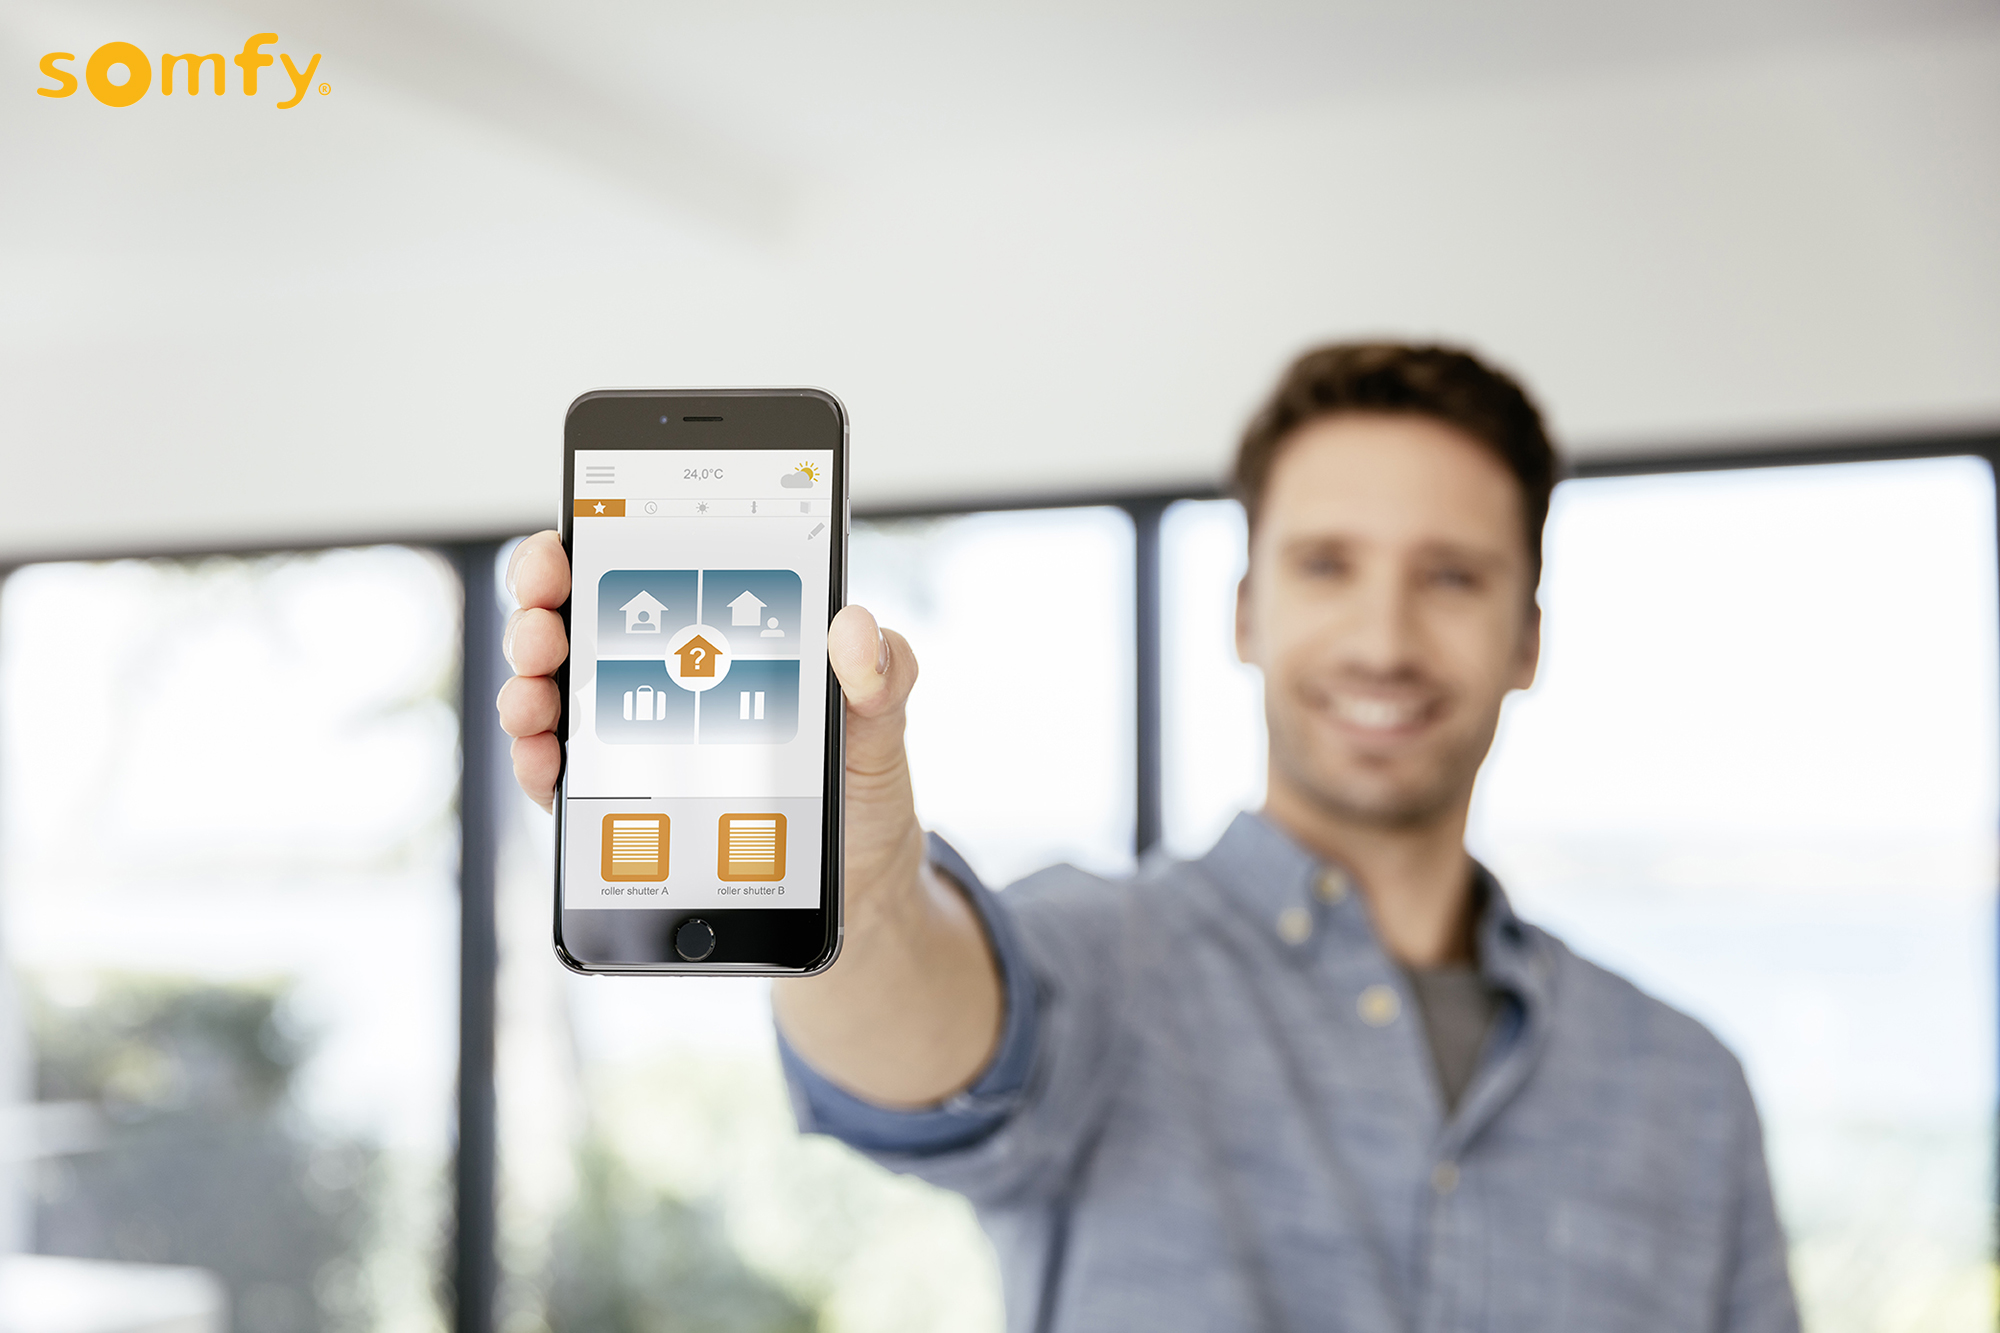 Somfy home automation